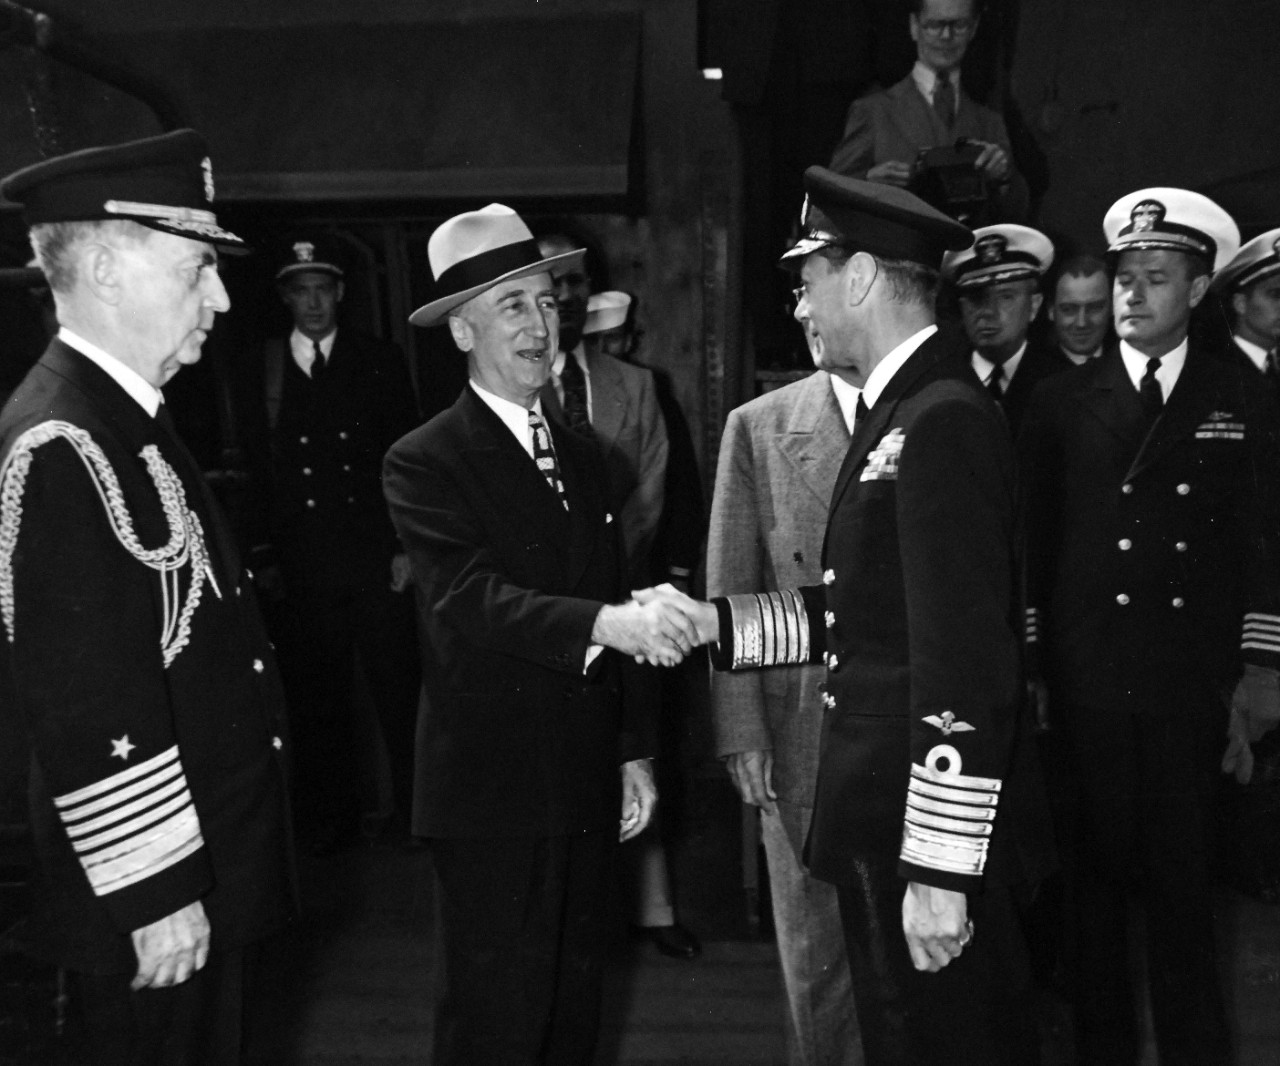 80-G-700231:  Potsdam Conference, July-August 1945. King George VI aboard USS Augusta (CA 31) for a return visit to President Harry S. Truman while the ship is in Plymouth Harbor, England.  Shown: Fleet Admiral William D. Leahy, Secretary of State James F. Byrnes, King George, and Captain James Foskett.  Official Photograph released August 1945.  U.S. Navy Photograph, now in the collections of the National Archives.  (2016/02/23).